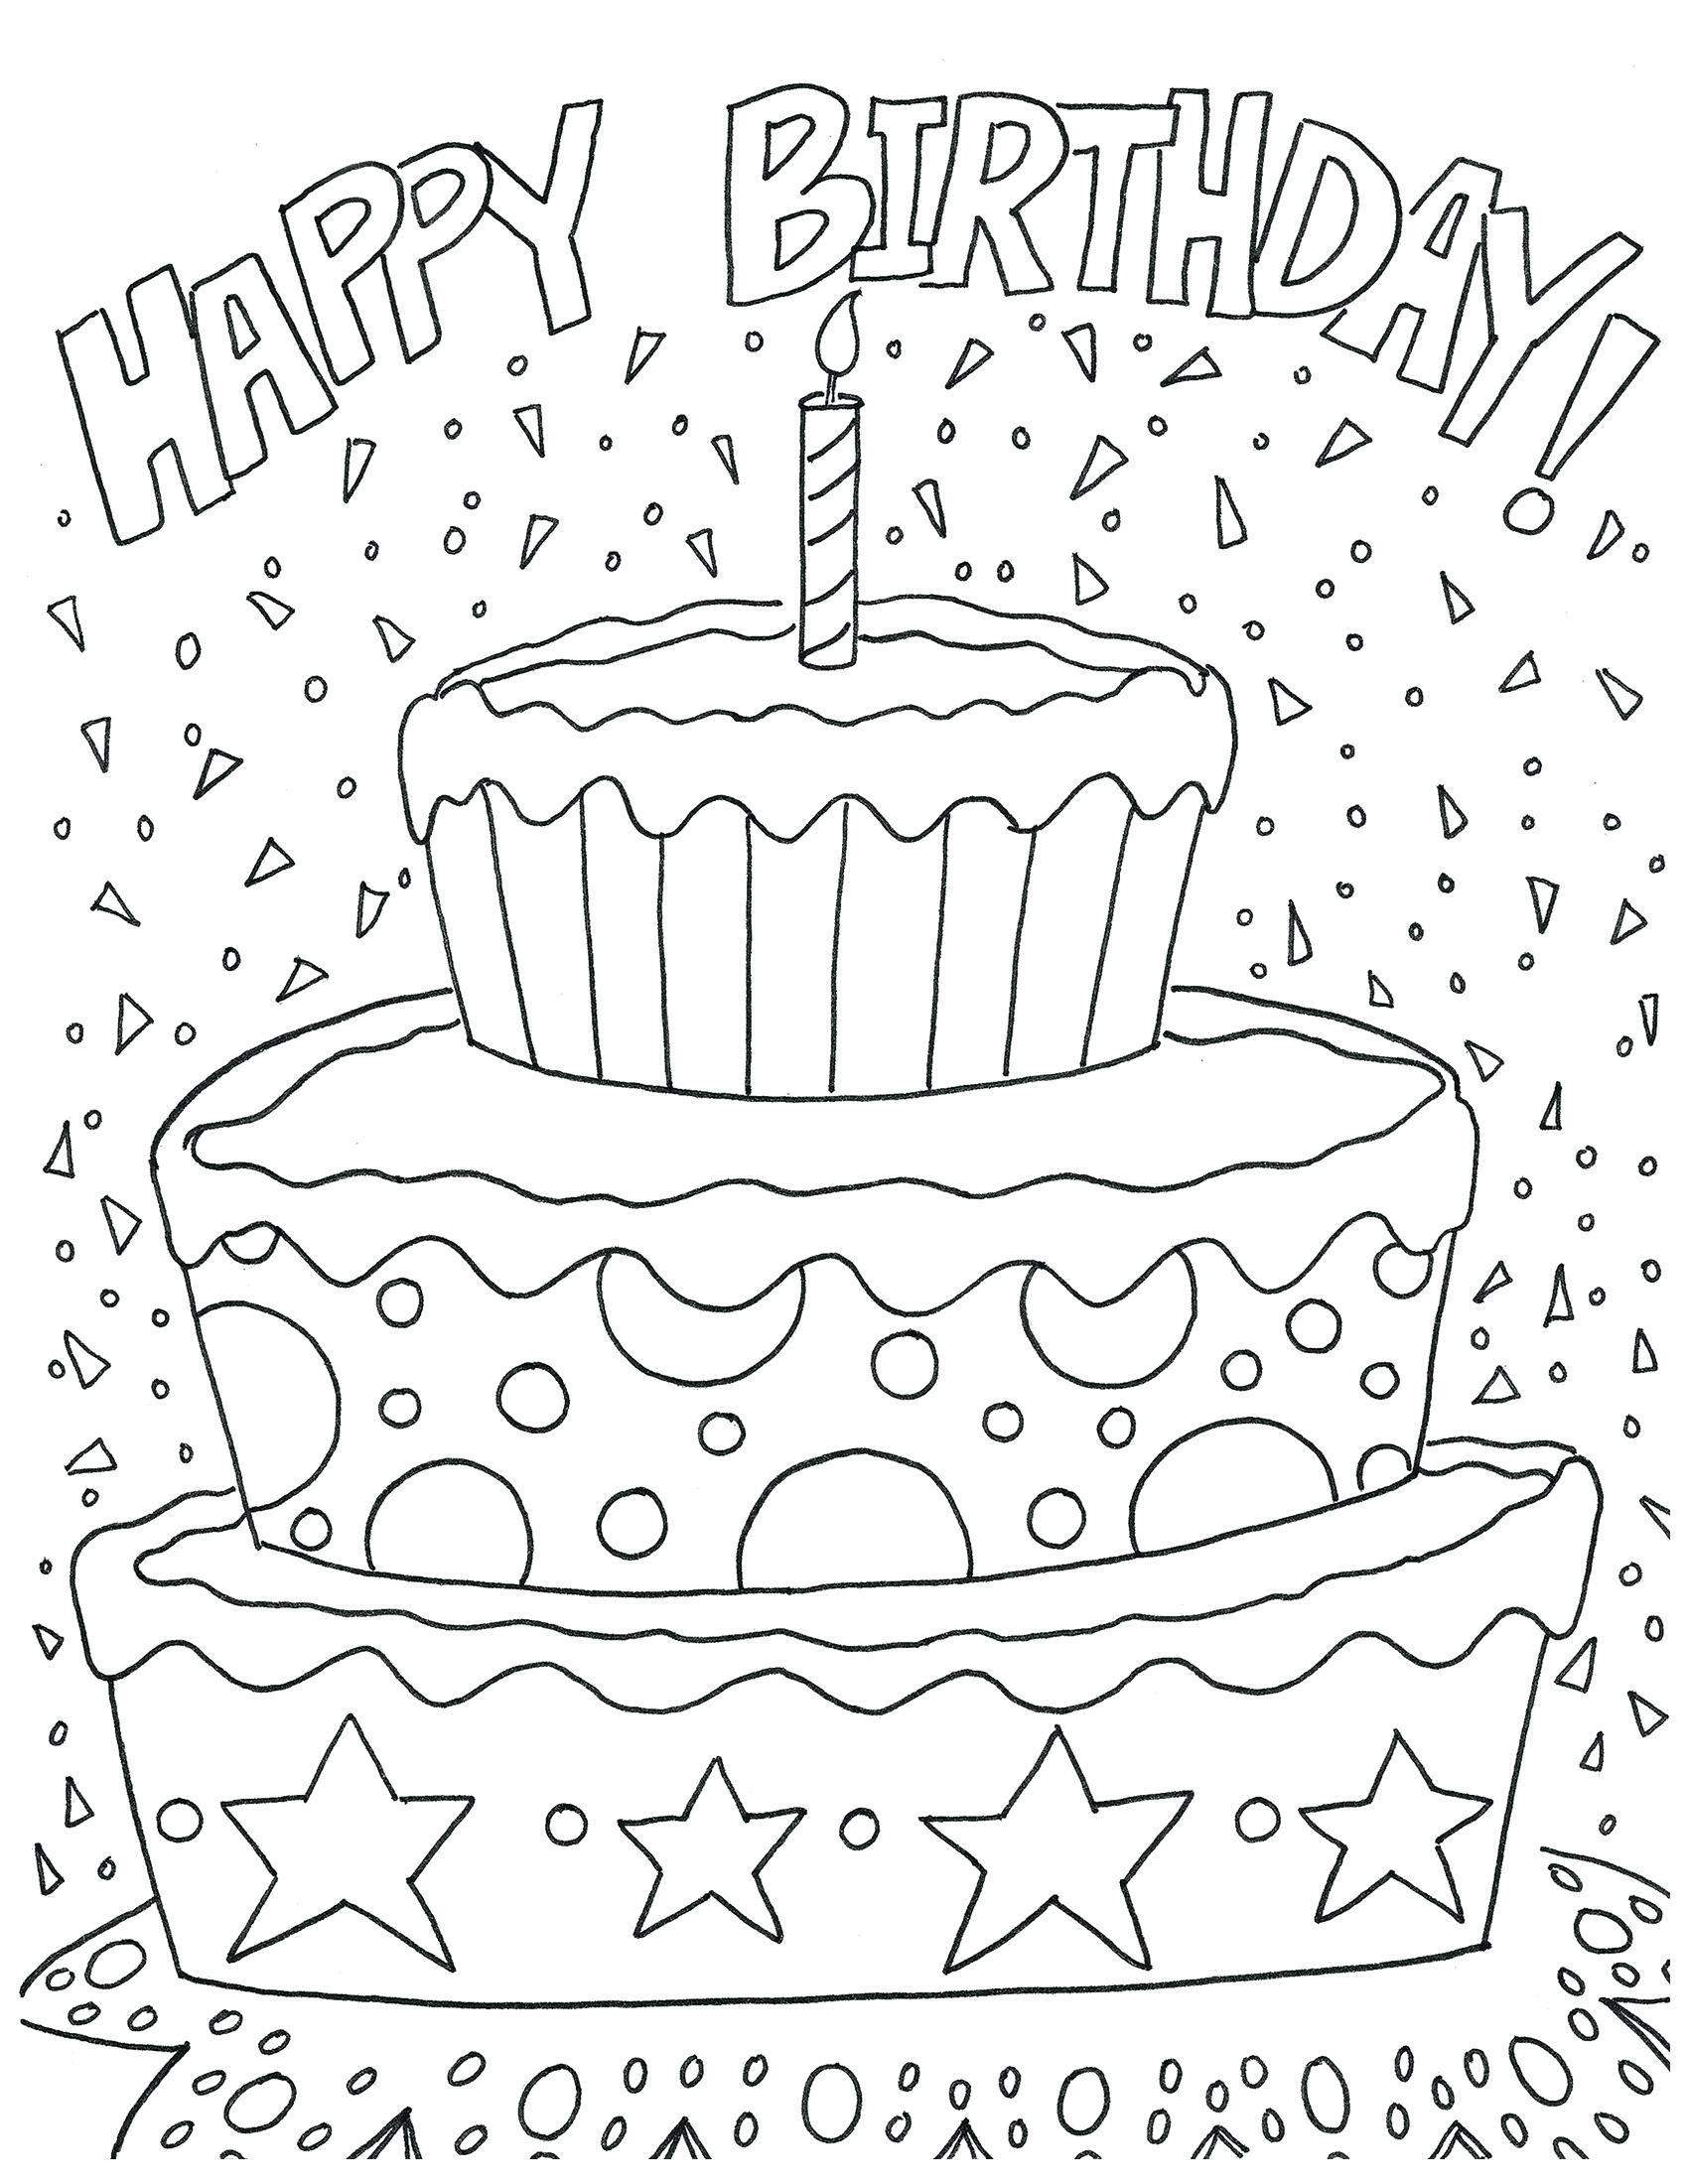 Birthday Coloring Pages For Adults at GetColorings.com | Free printable ...